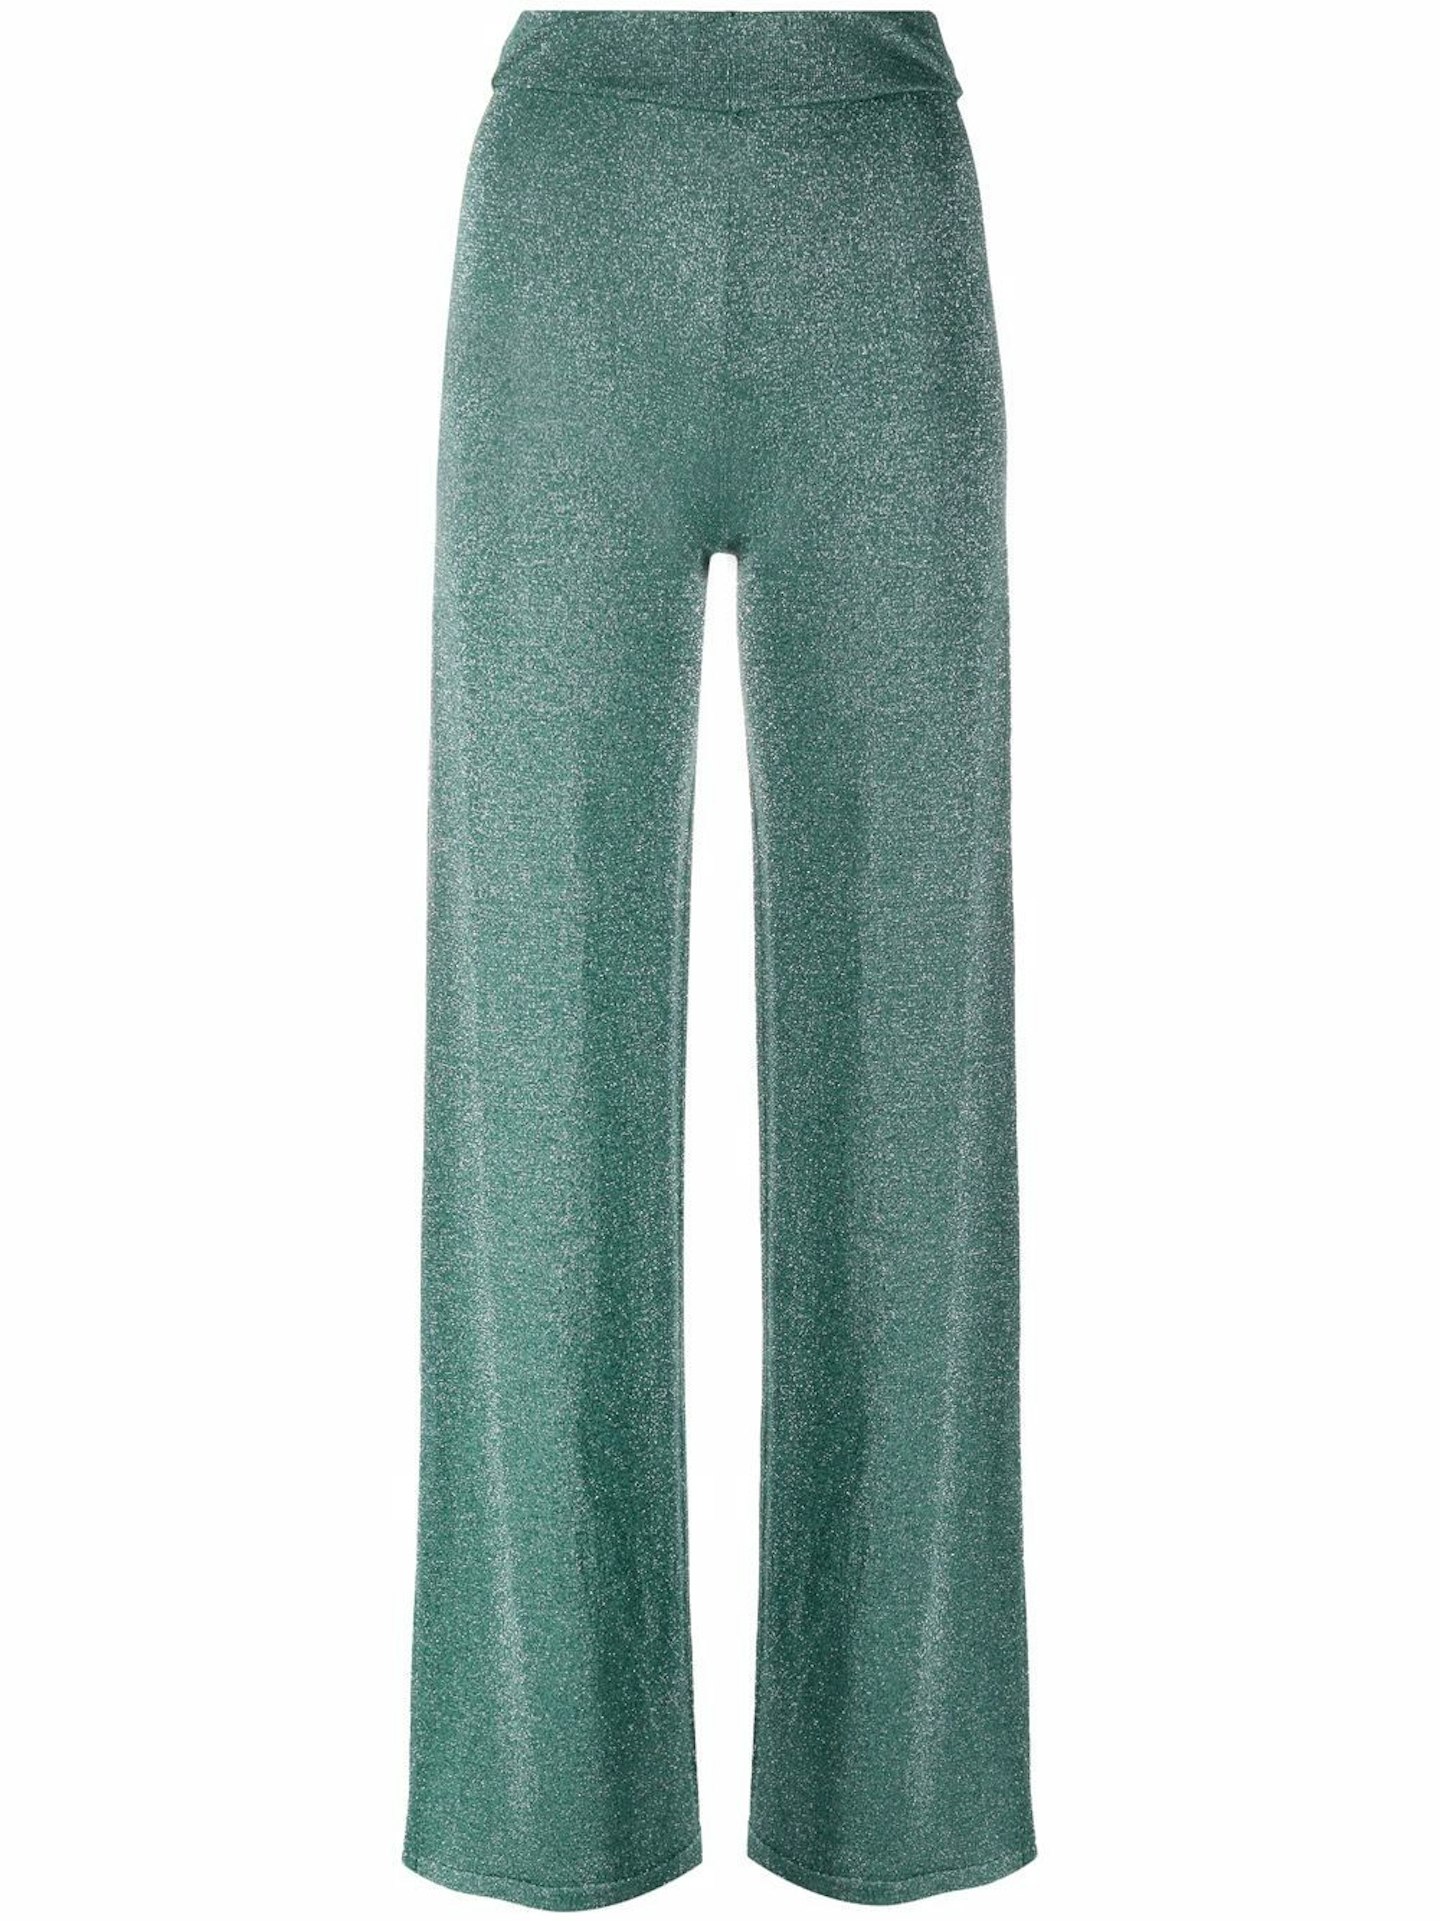 best trousers for summer  Pinko, High Waisted Metallic Trousers, £199